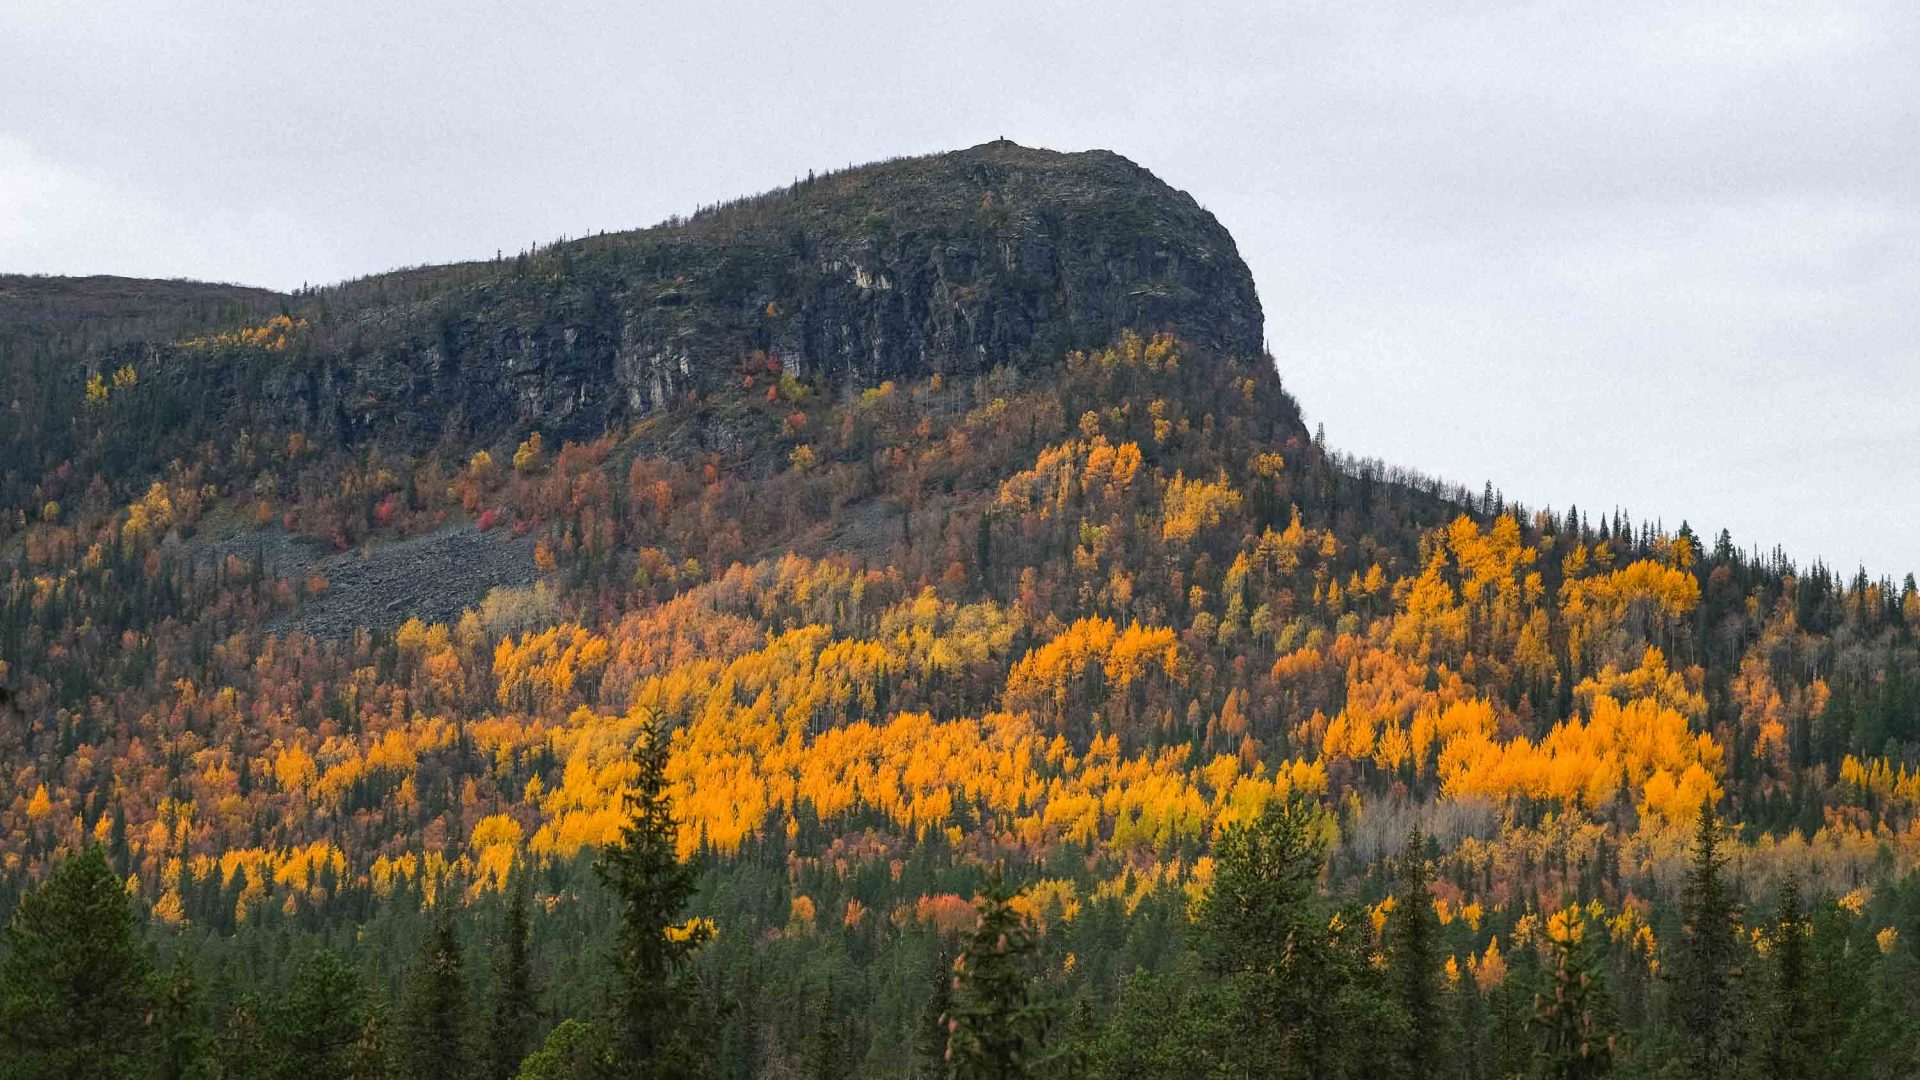 Green and yellow trees with a rock face in the background.